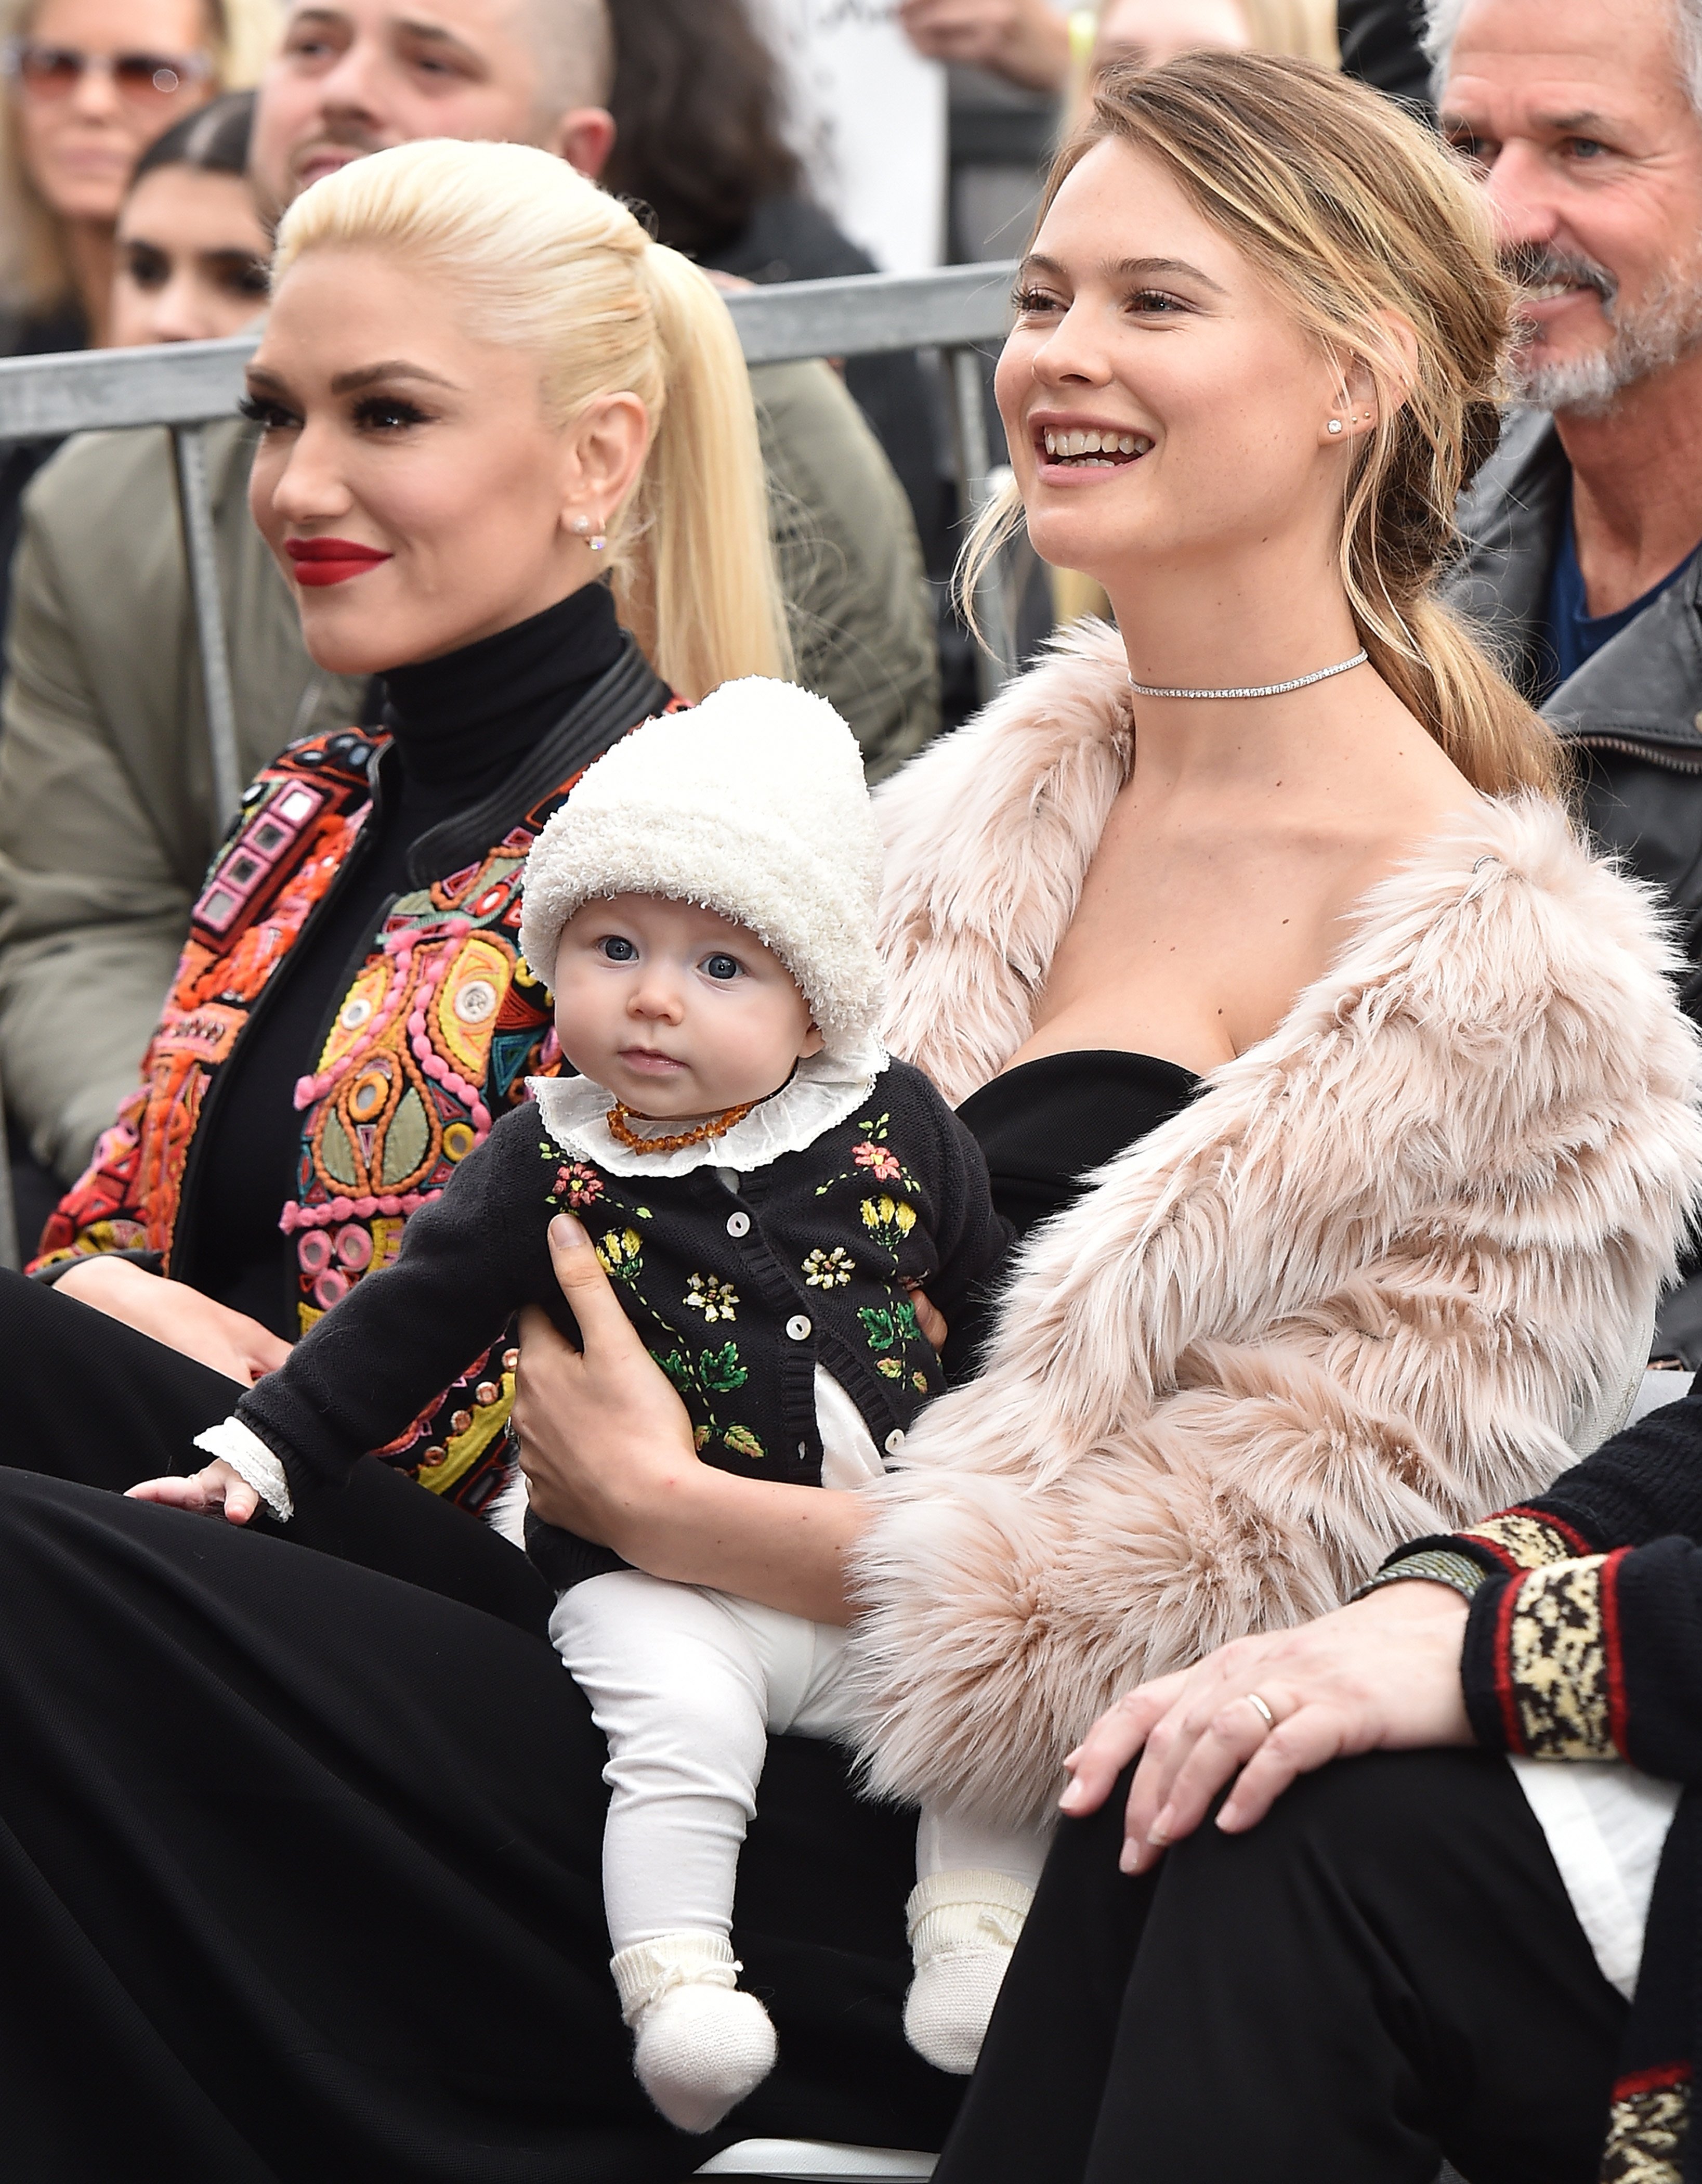 Model Behati Prinsloo, daughter Dusty Rose Levine and singer Gwen Stefani attend the ceremony honoring Adam Levine with star on the Hollywood Walk of Fame on February 10, 2017 in Hollywood, California | Source: Getty Images